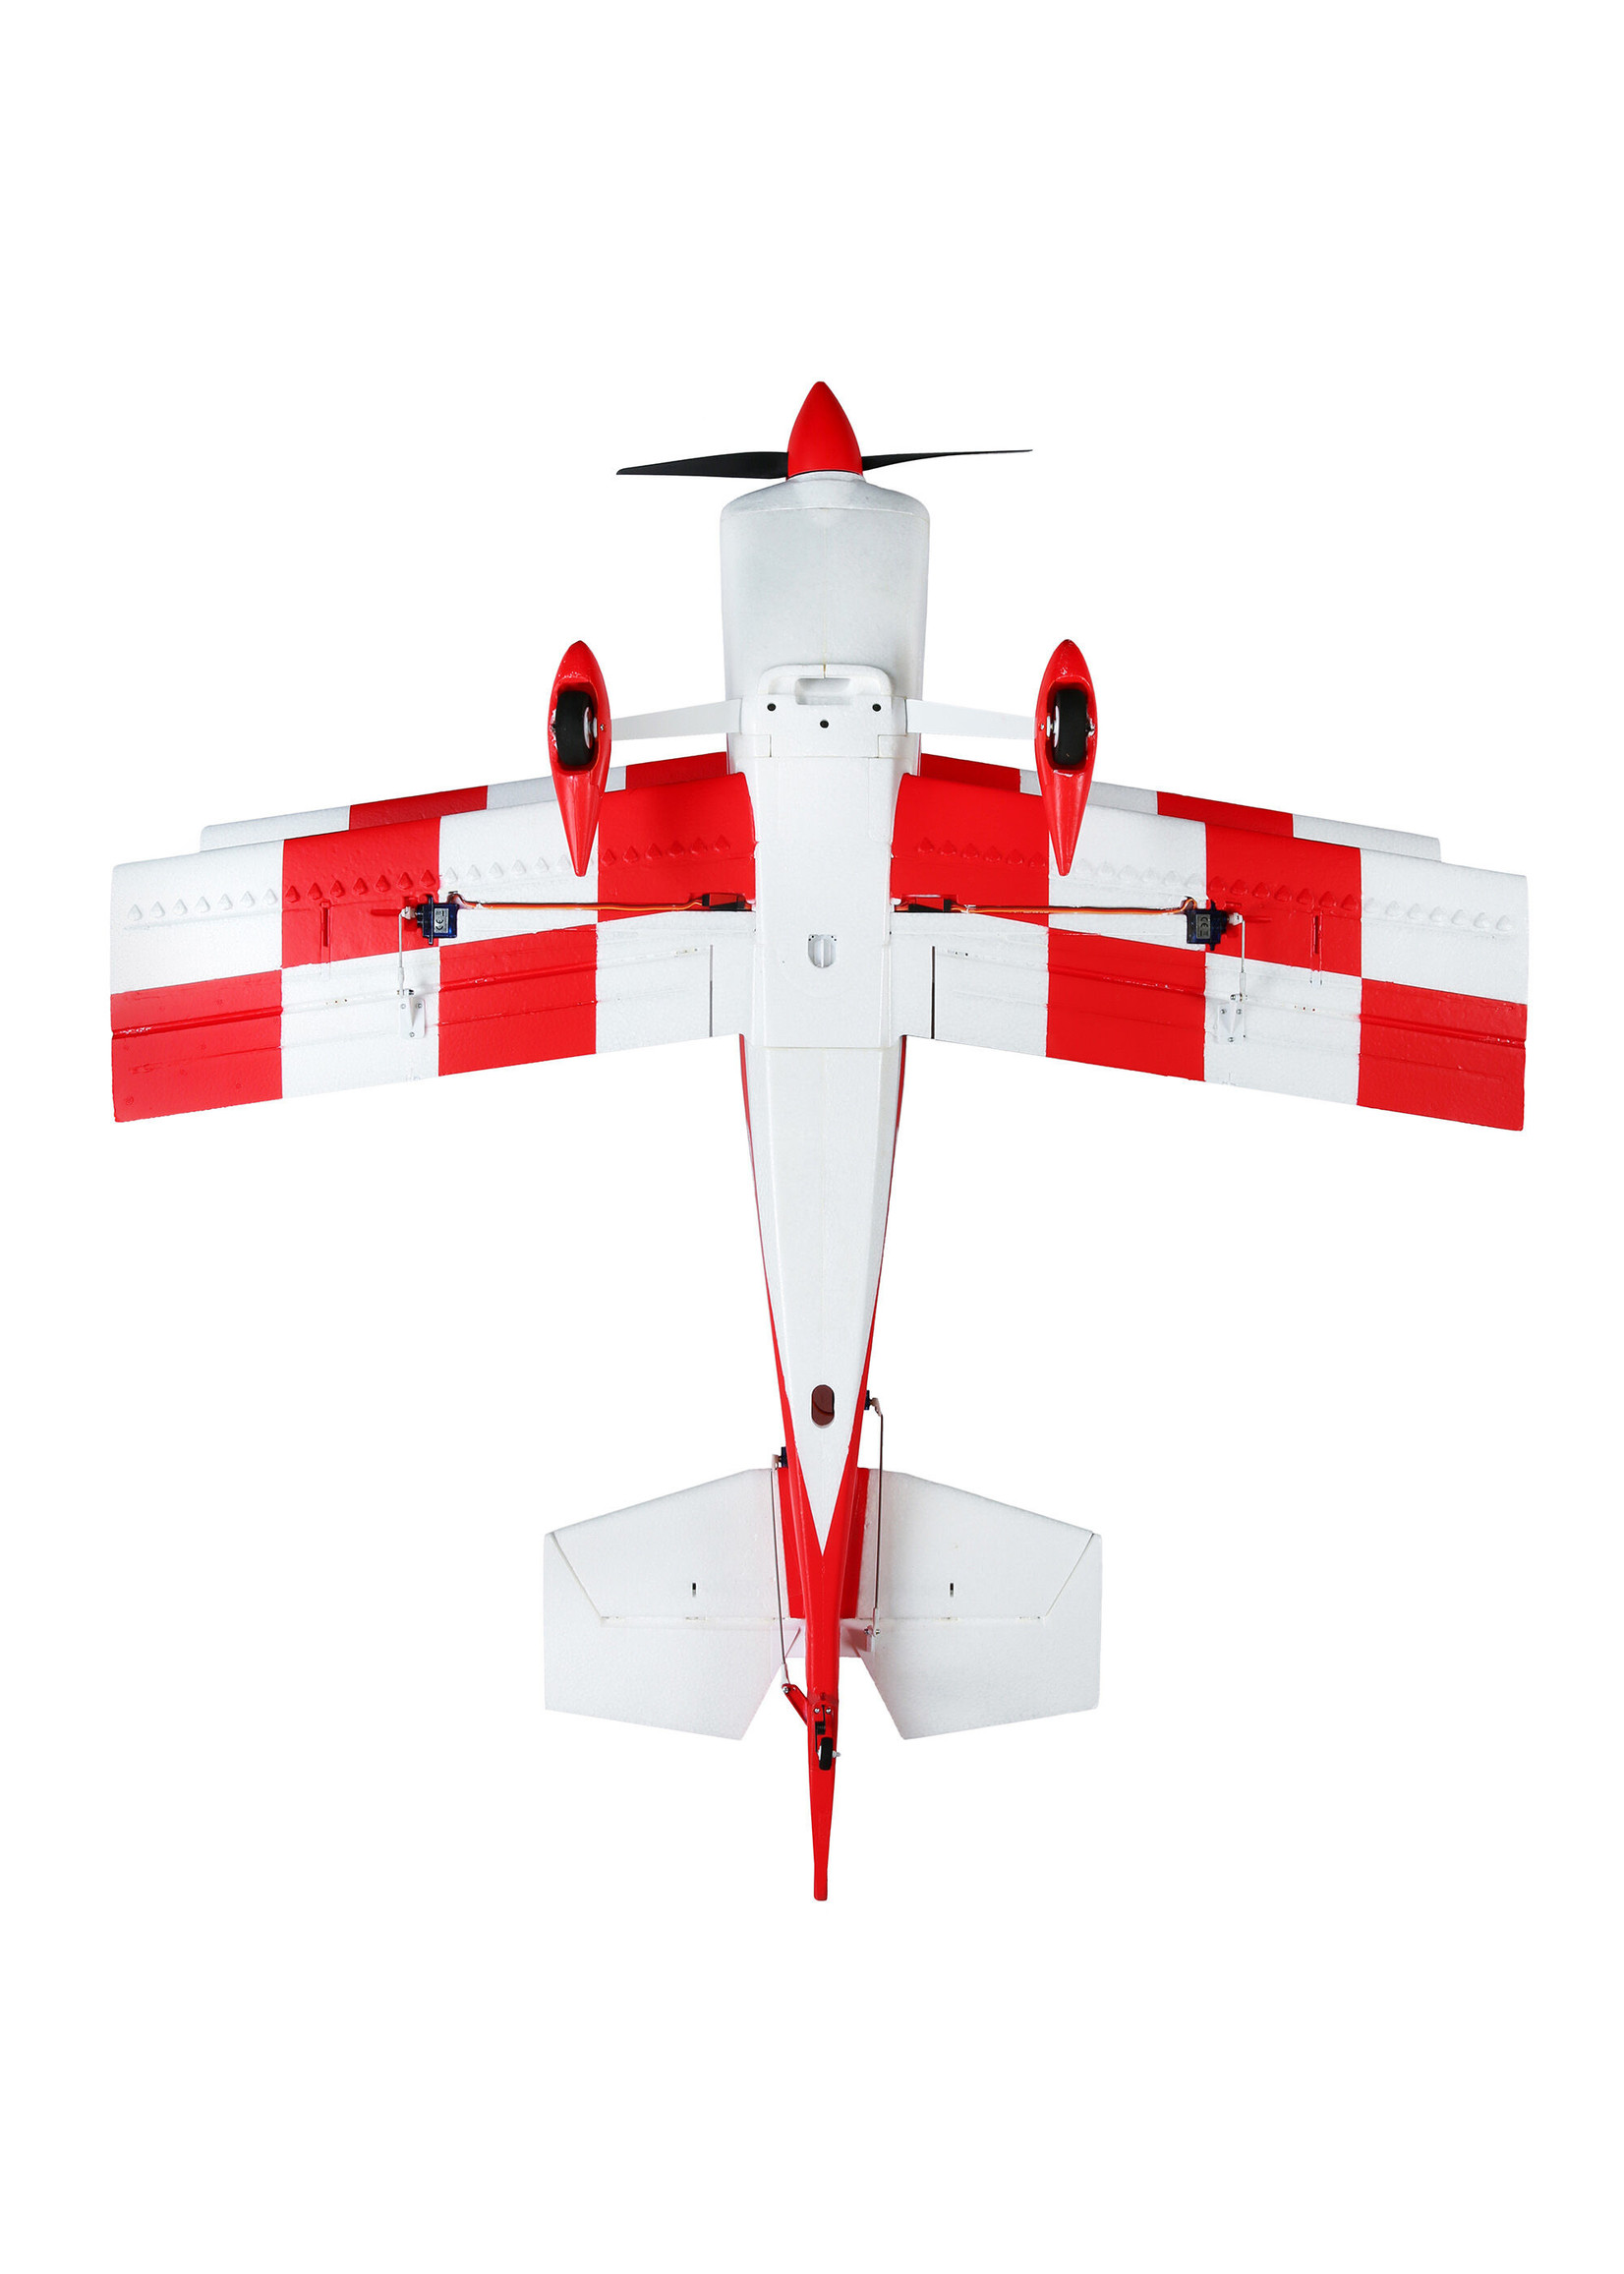 E-flite 16550 - Ultimate 3D 950mm Smart BNF Basic with AS3X & SAFE